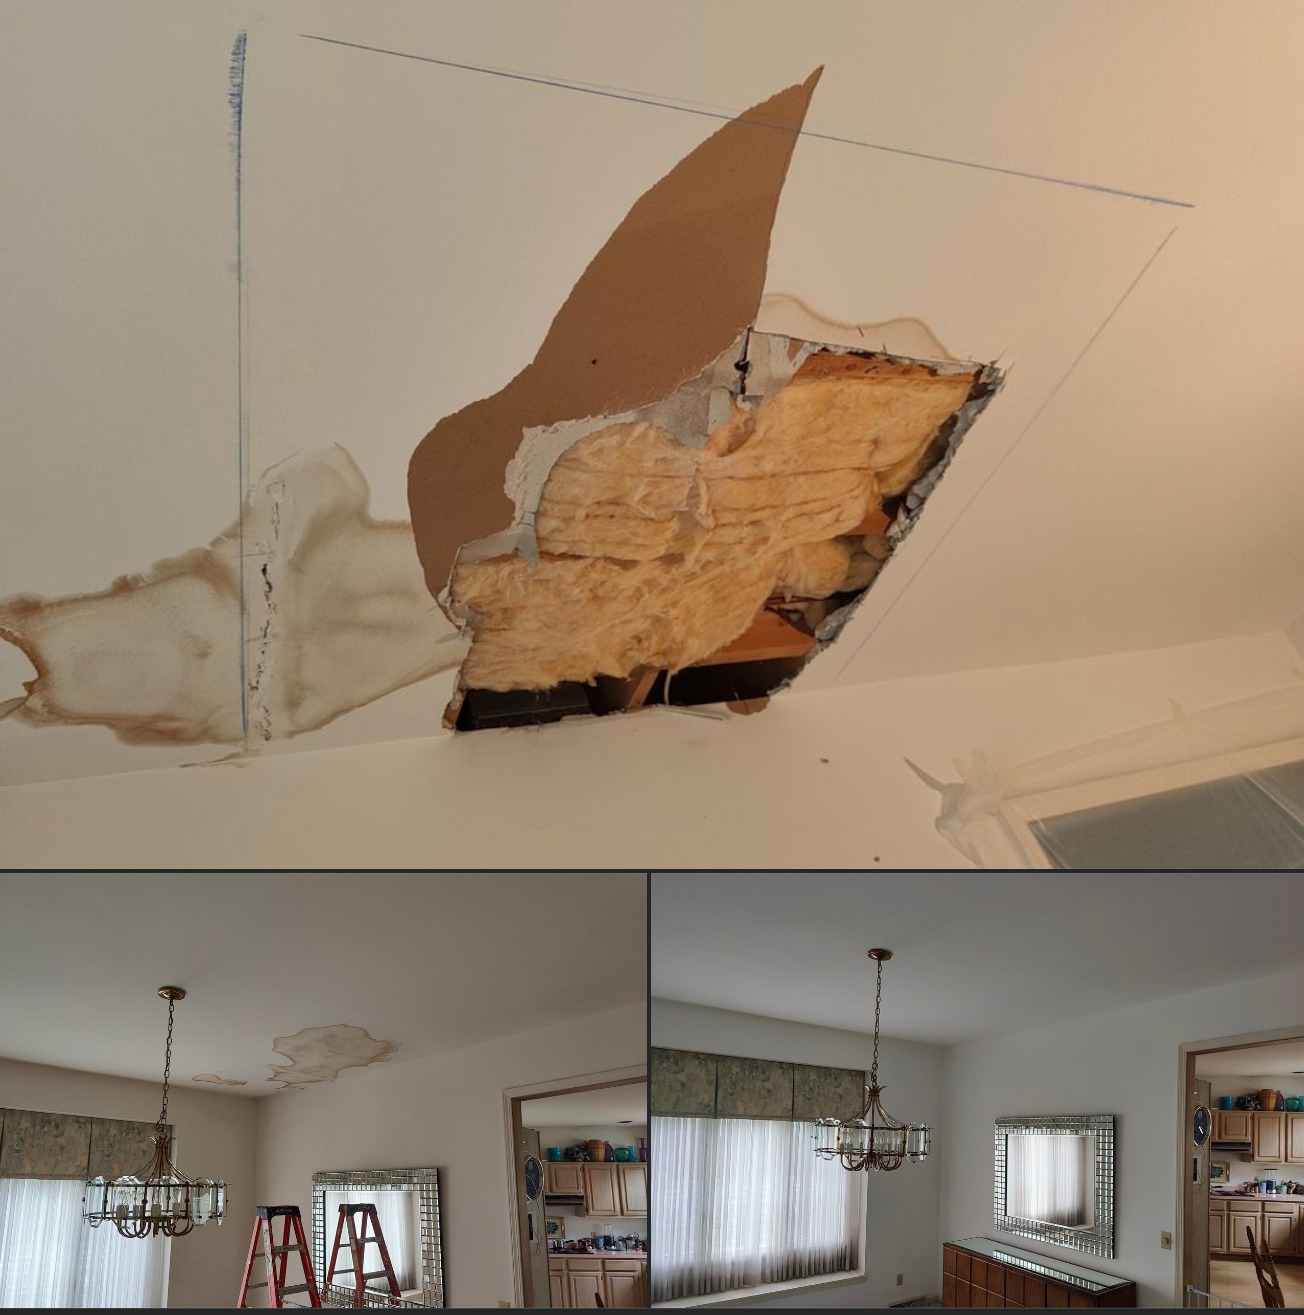 Ceiling Repair from Water Damage- East Amherst, NY